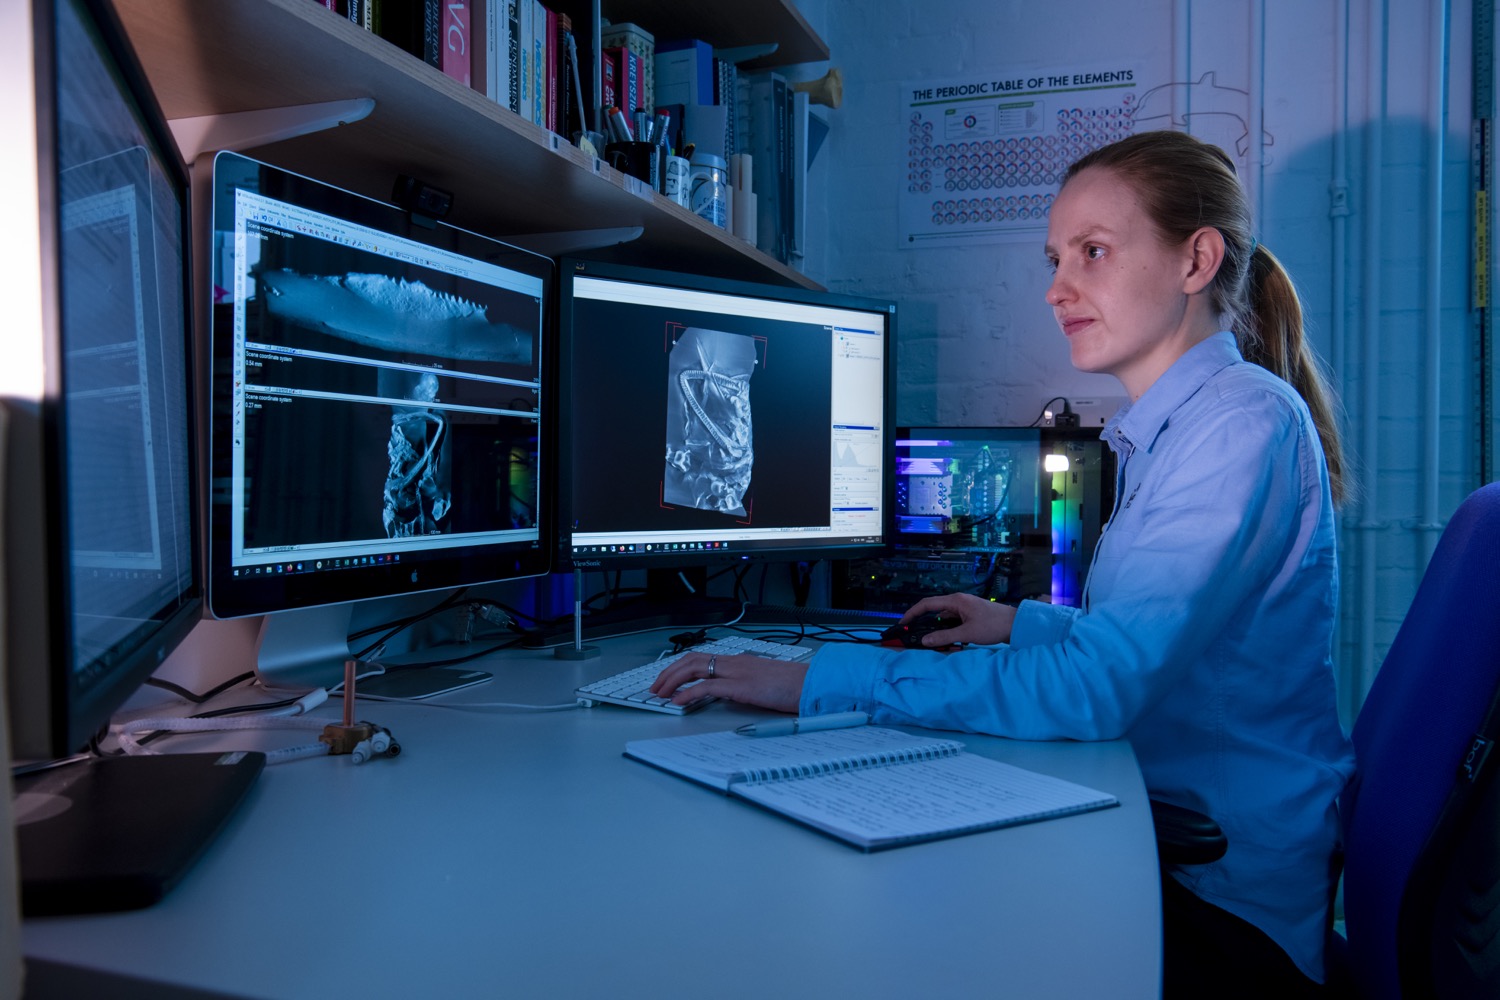 Dr Kathryn Rankin looking at CT images on a computer screen